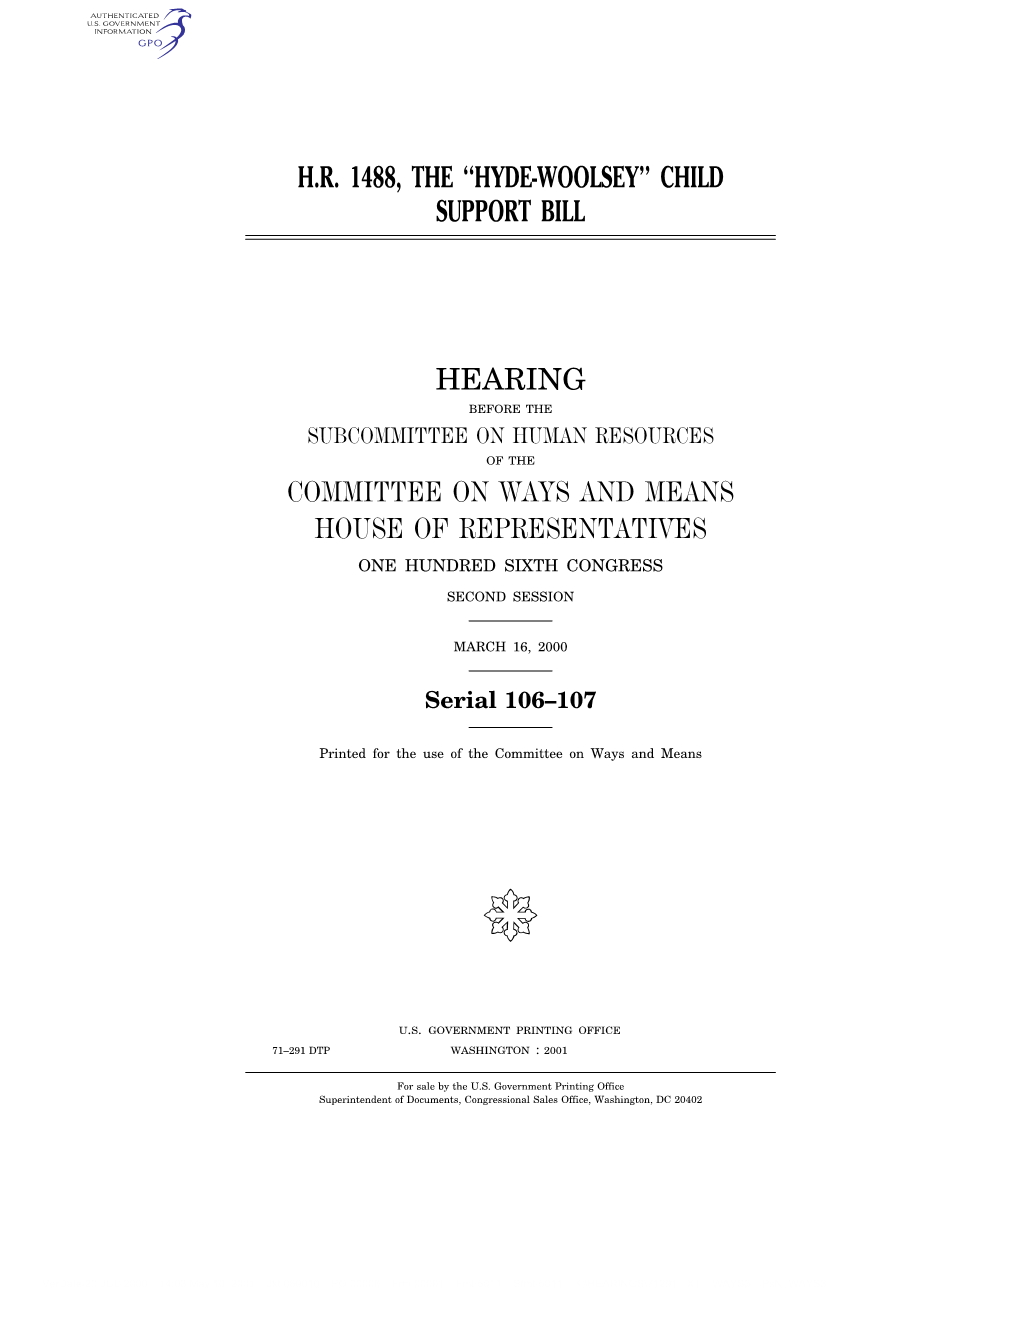 H.R. 1488, the ''Hyde-Woolsey'' Child Support Bill Hearing